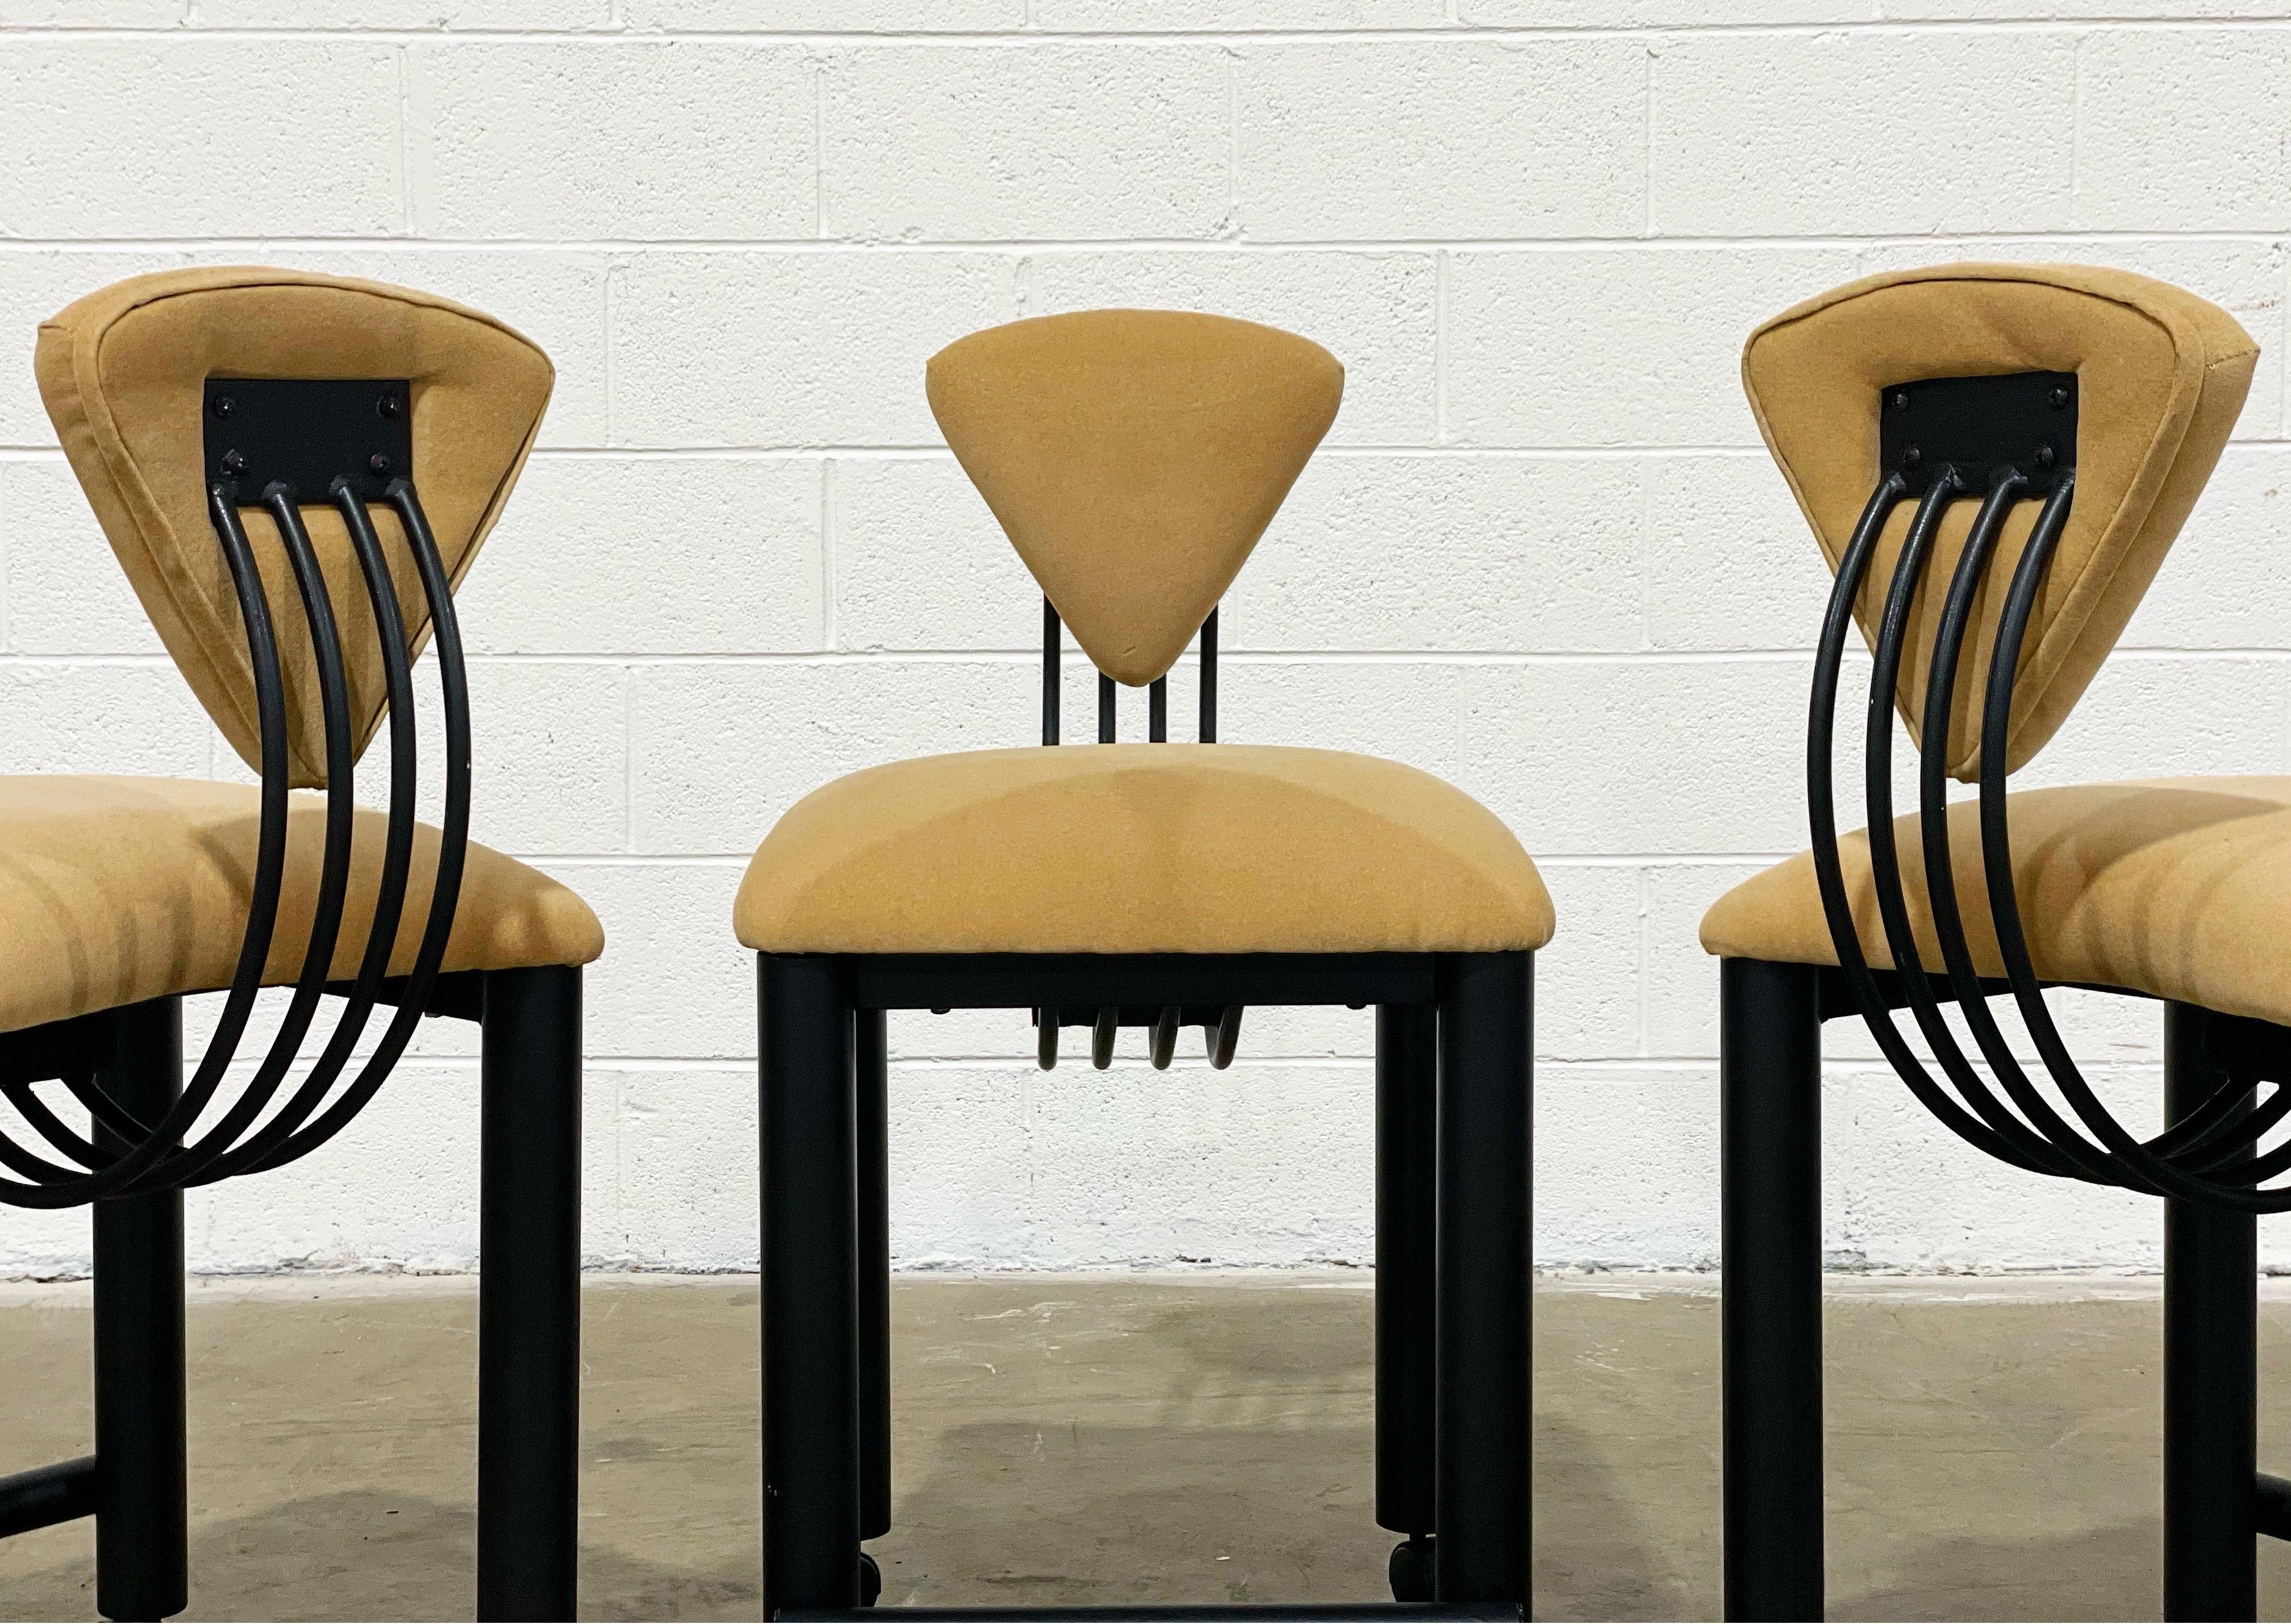 Post Modern Memphis Milano style counter height barstools on casters. Black lacquered metal frames saddle tone velvet upholstered seat and backrest. Appealing from any angle.
These are counter height bar stools, not bar height.
Three stools